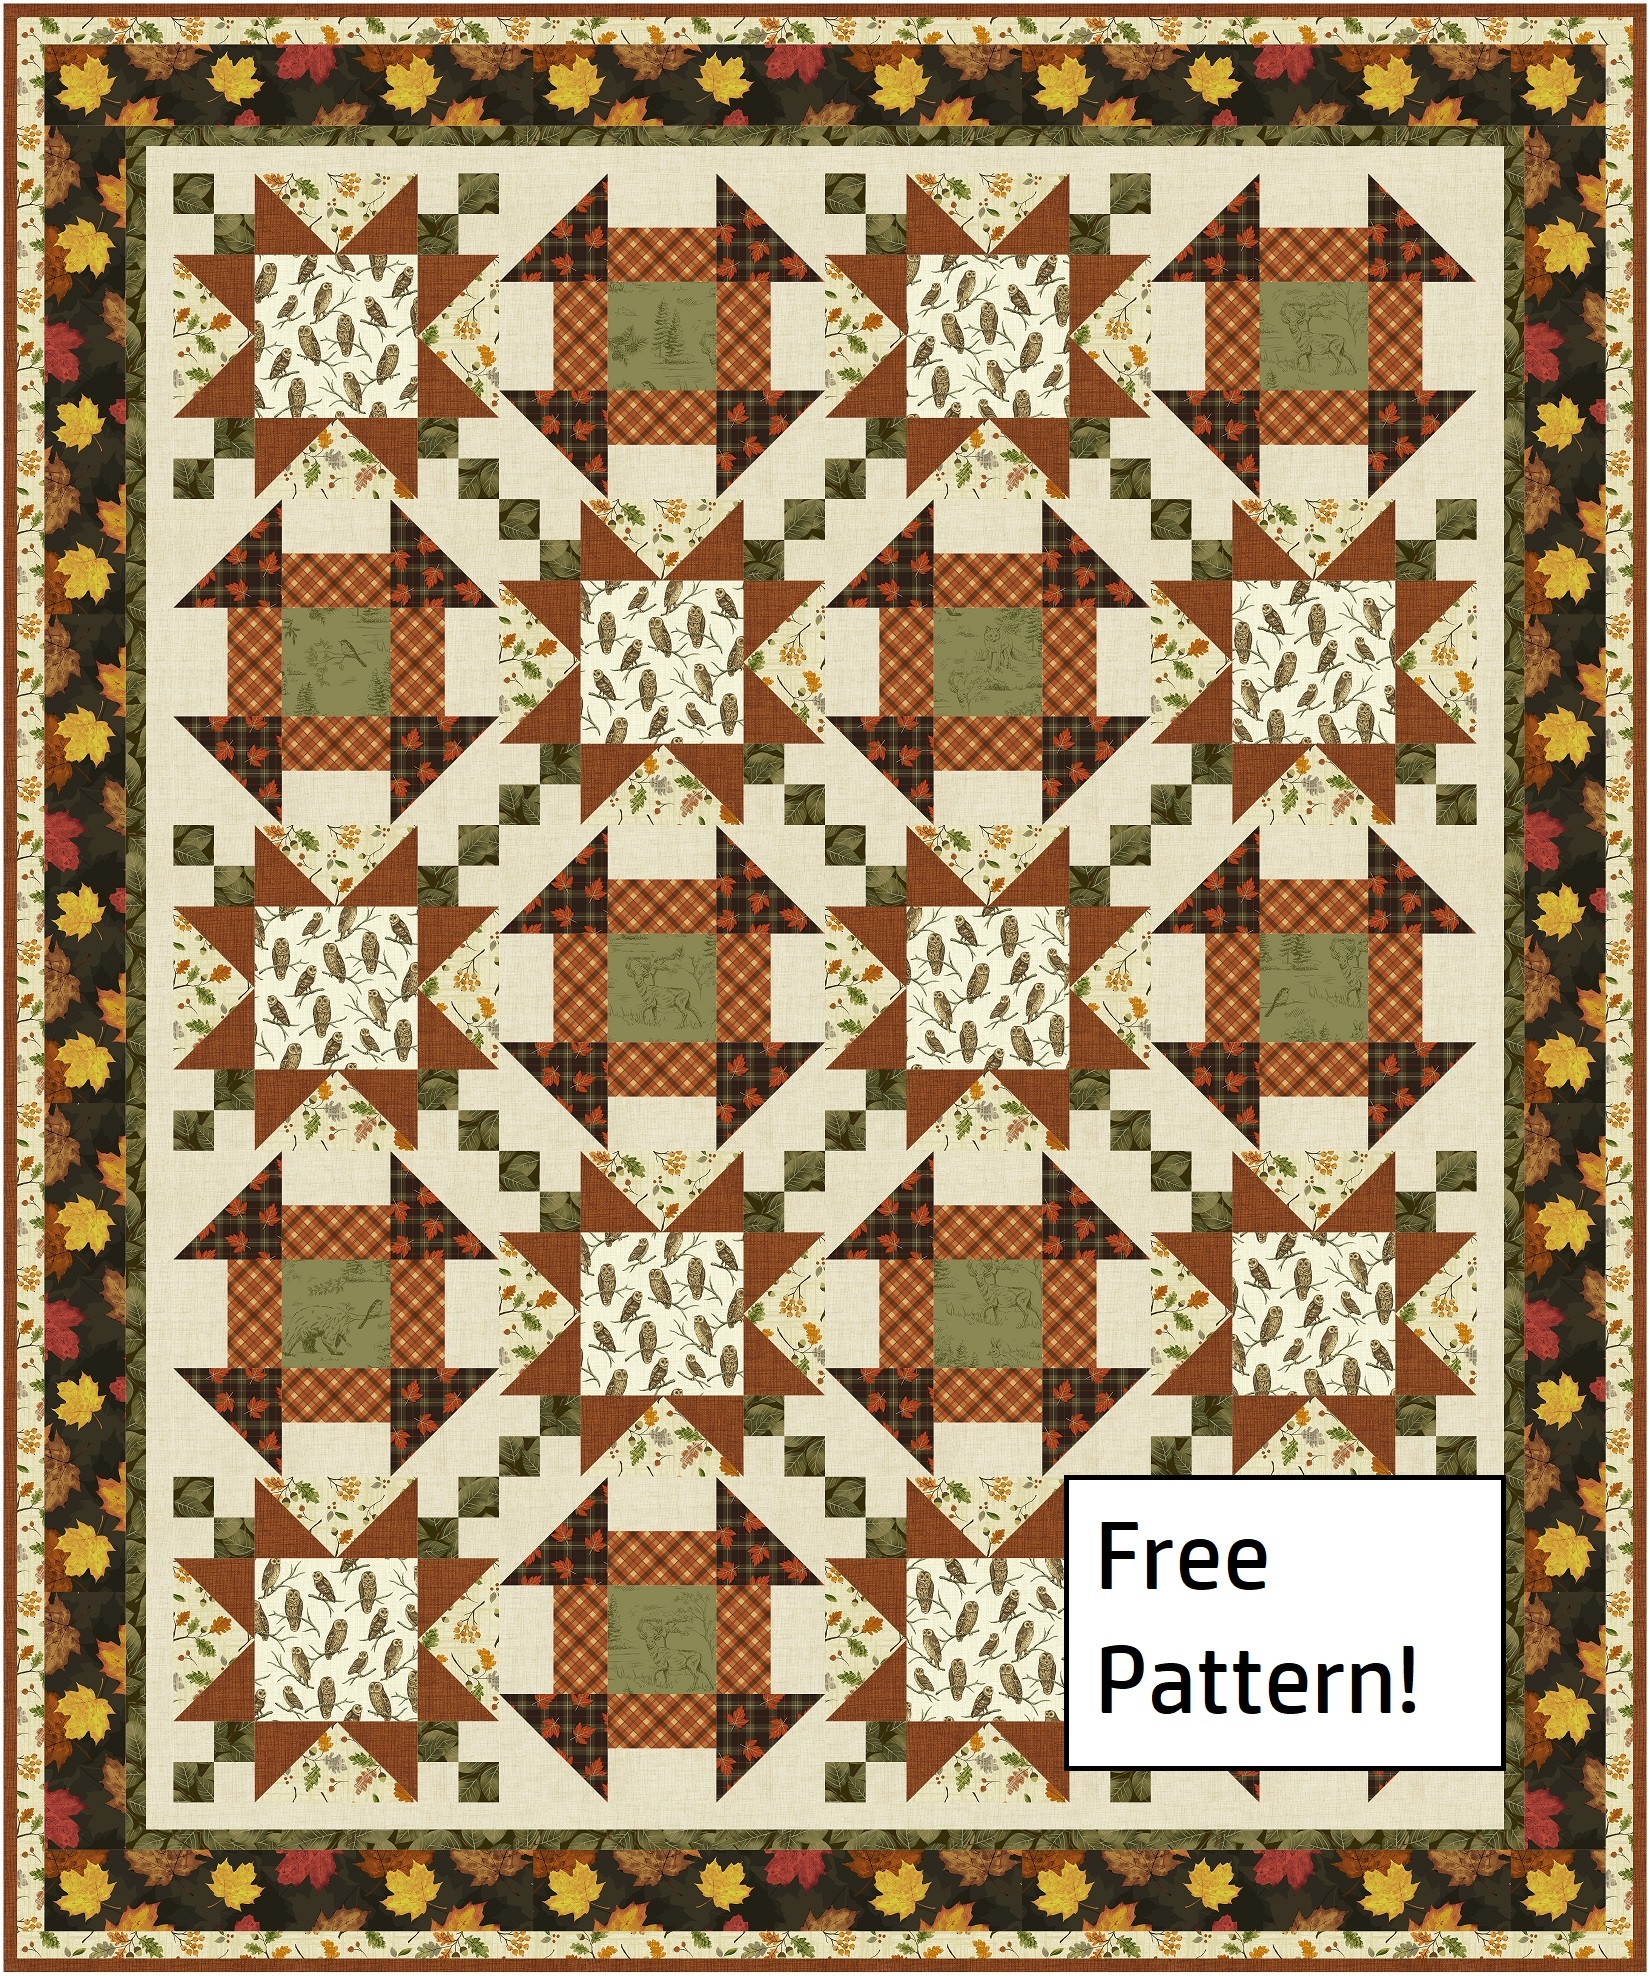 free-pattern-for-lap-quilt-or-throw-must-make-pieced-brain